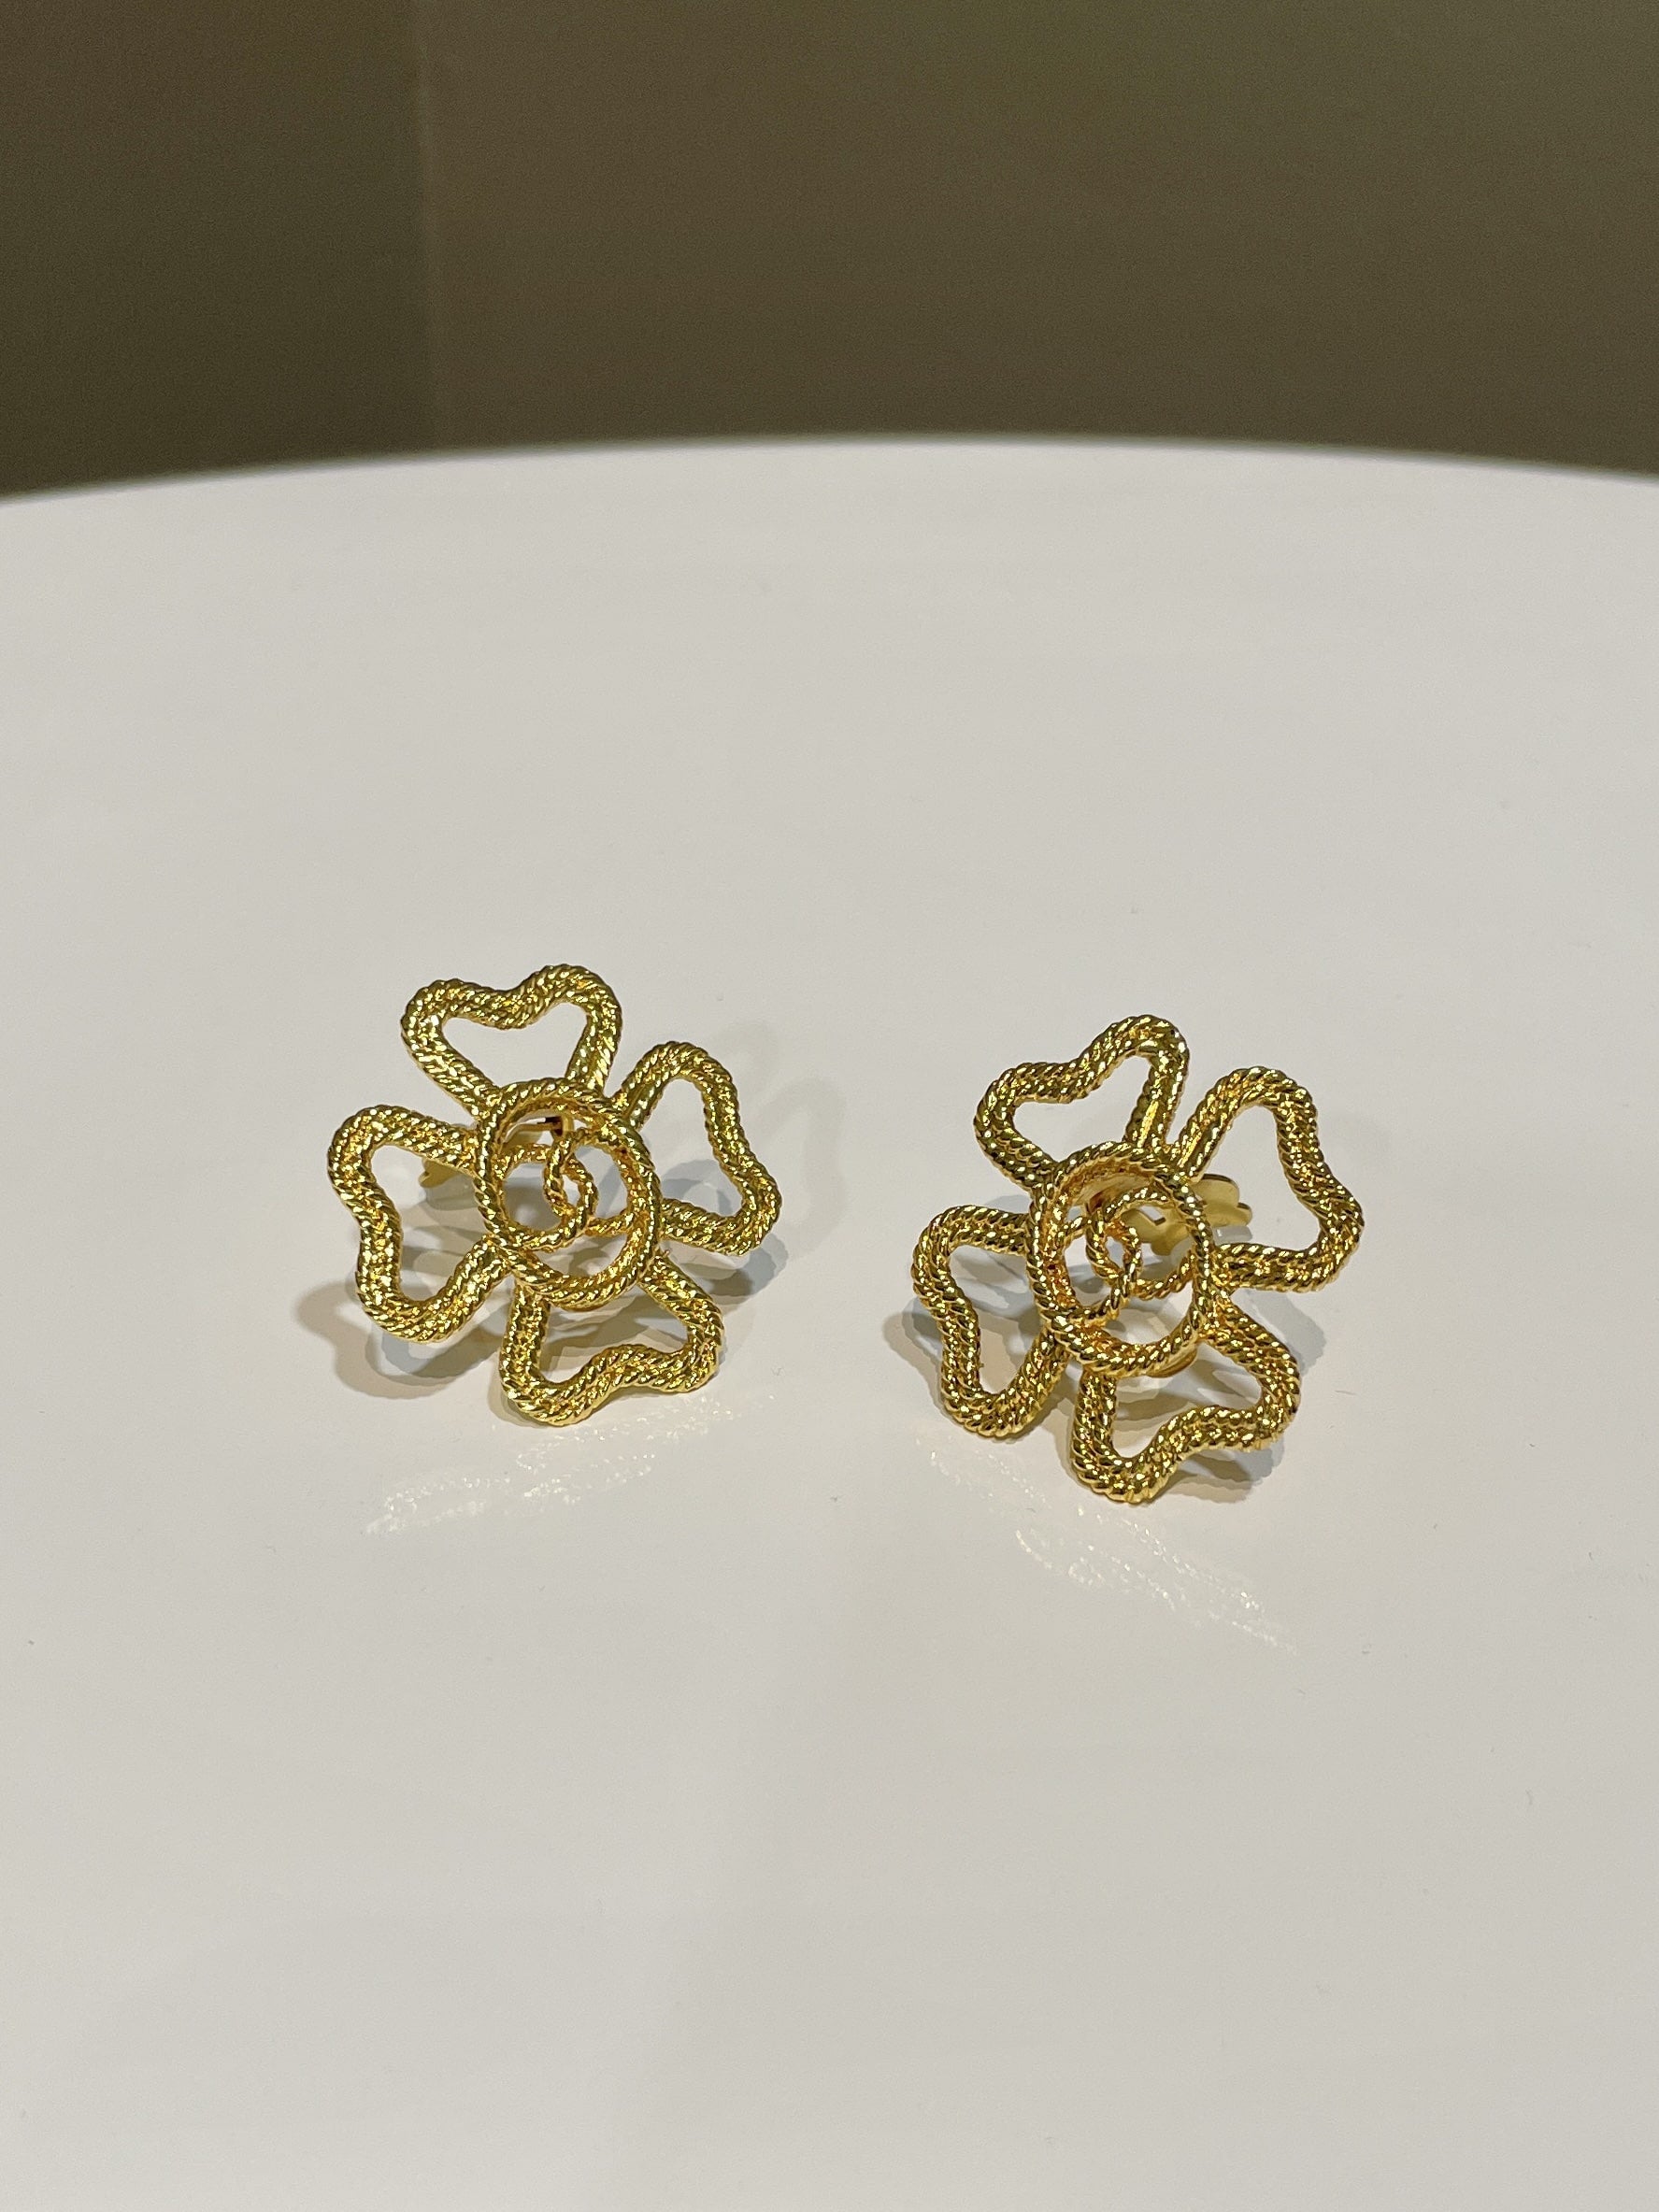 Chanel Vintage Clover Cc Clip On Earrings